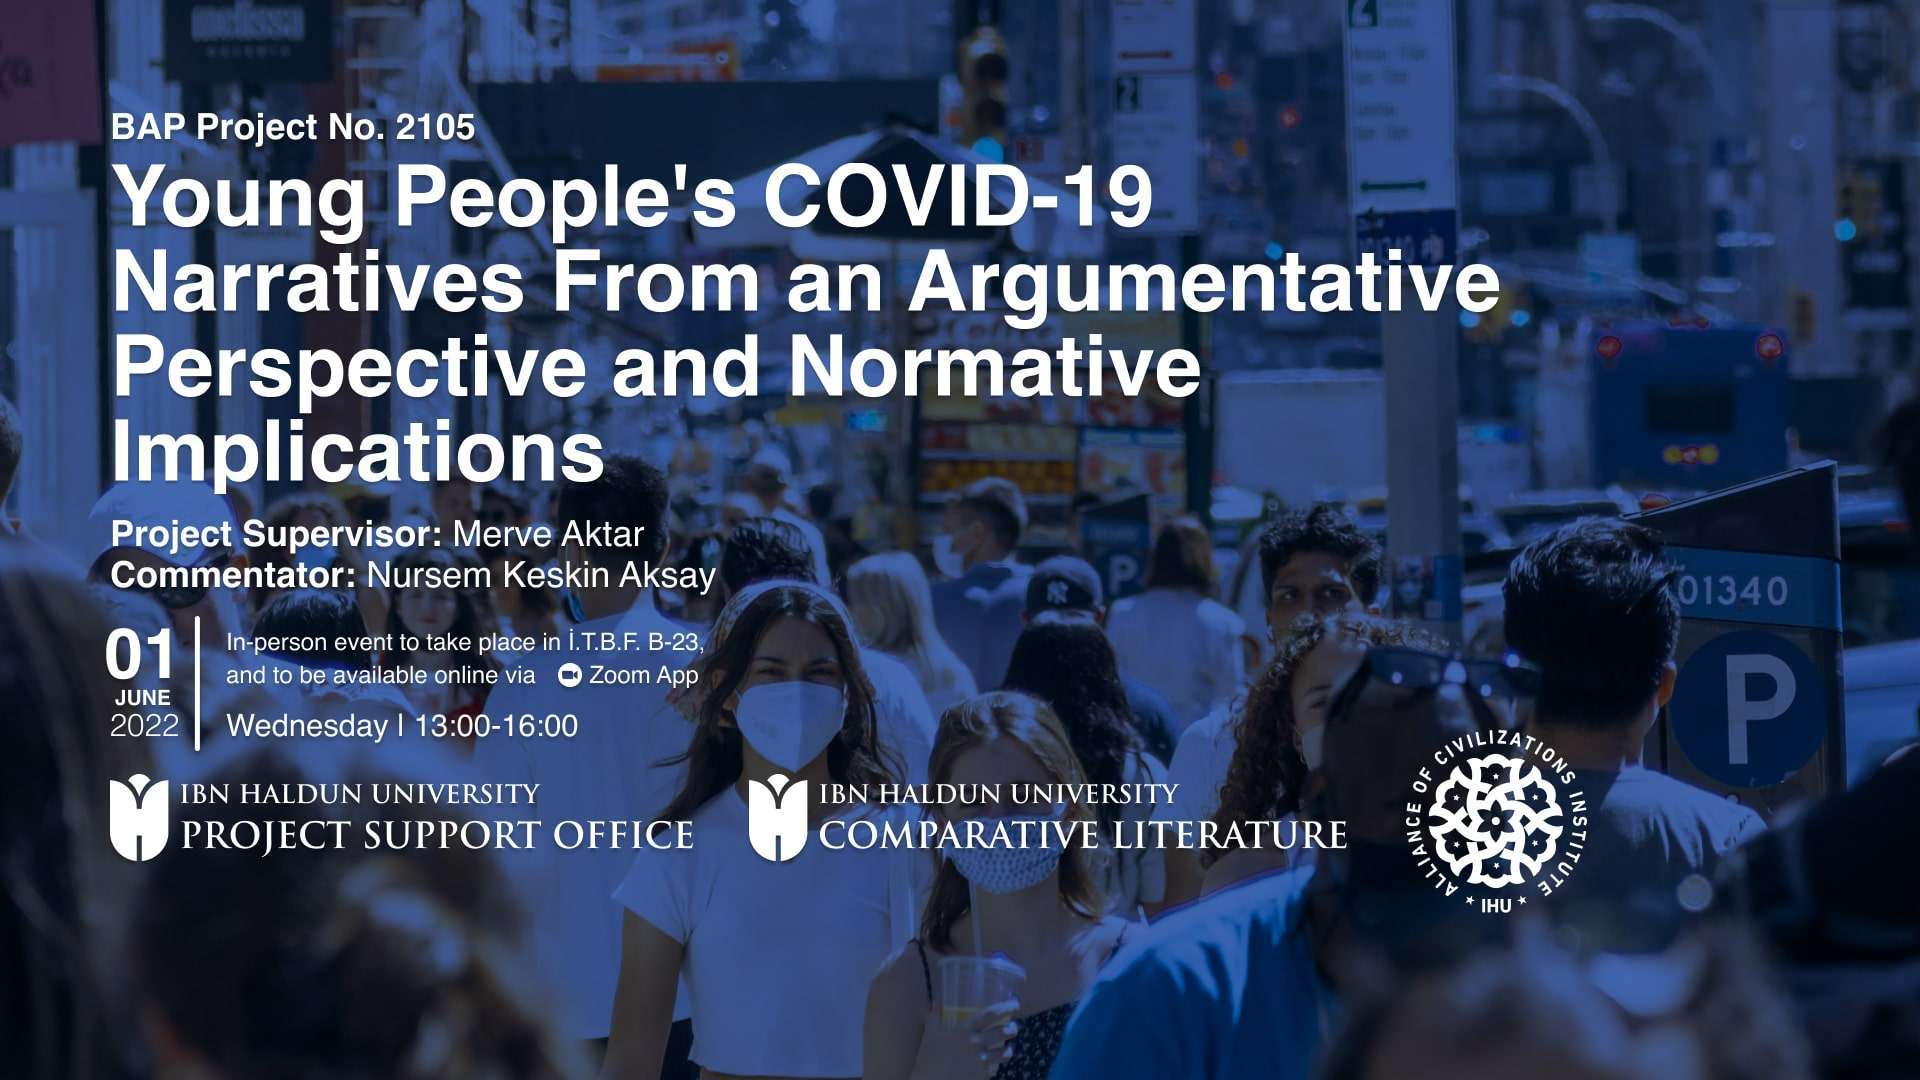 Young People's COVID-19 Narratives From an Argumentative Perspective and Normative Implications